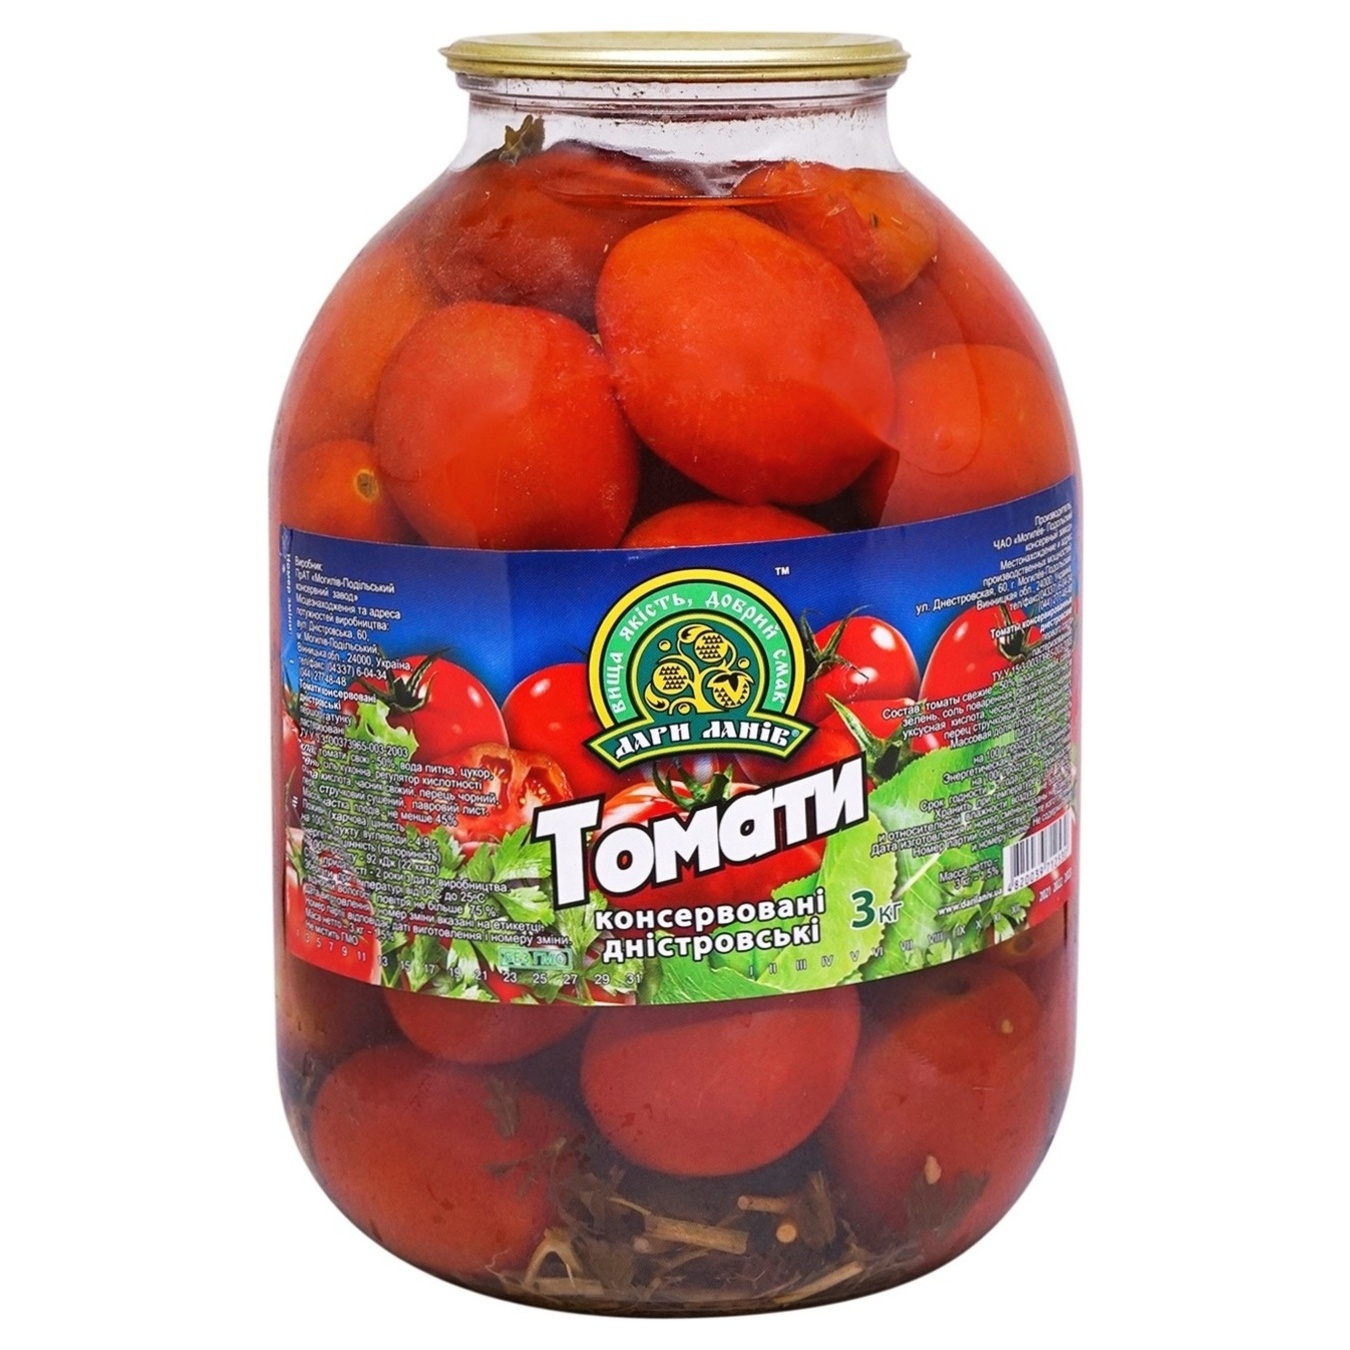 Dary Laniv Tomaty Dnistrovski Canned Tomatoes 3kg